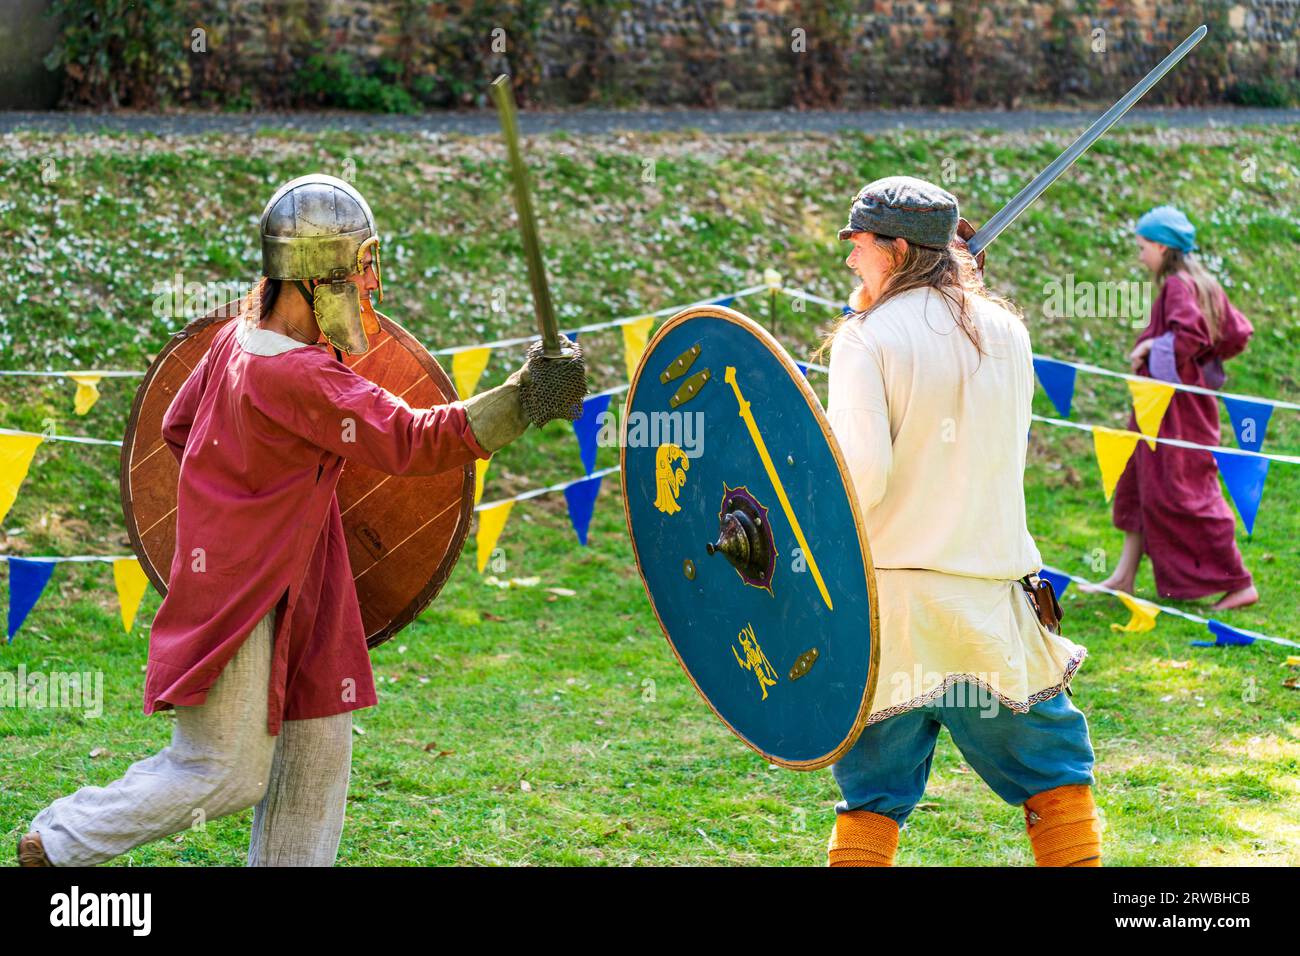 Two men in period costume, jousting with swords in the sunshine during a medieval re-enactment in an area enclosed by bunting of yellow and blue flags Stock Photo